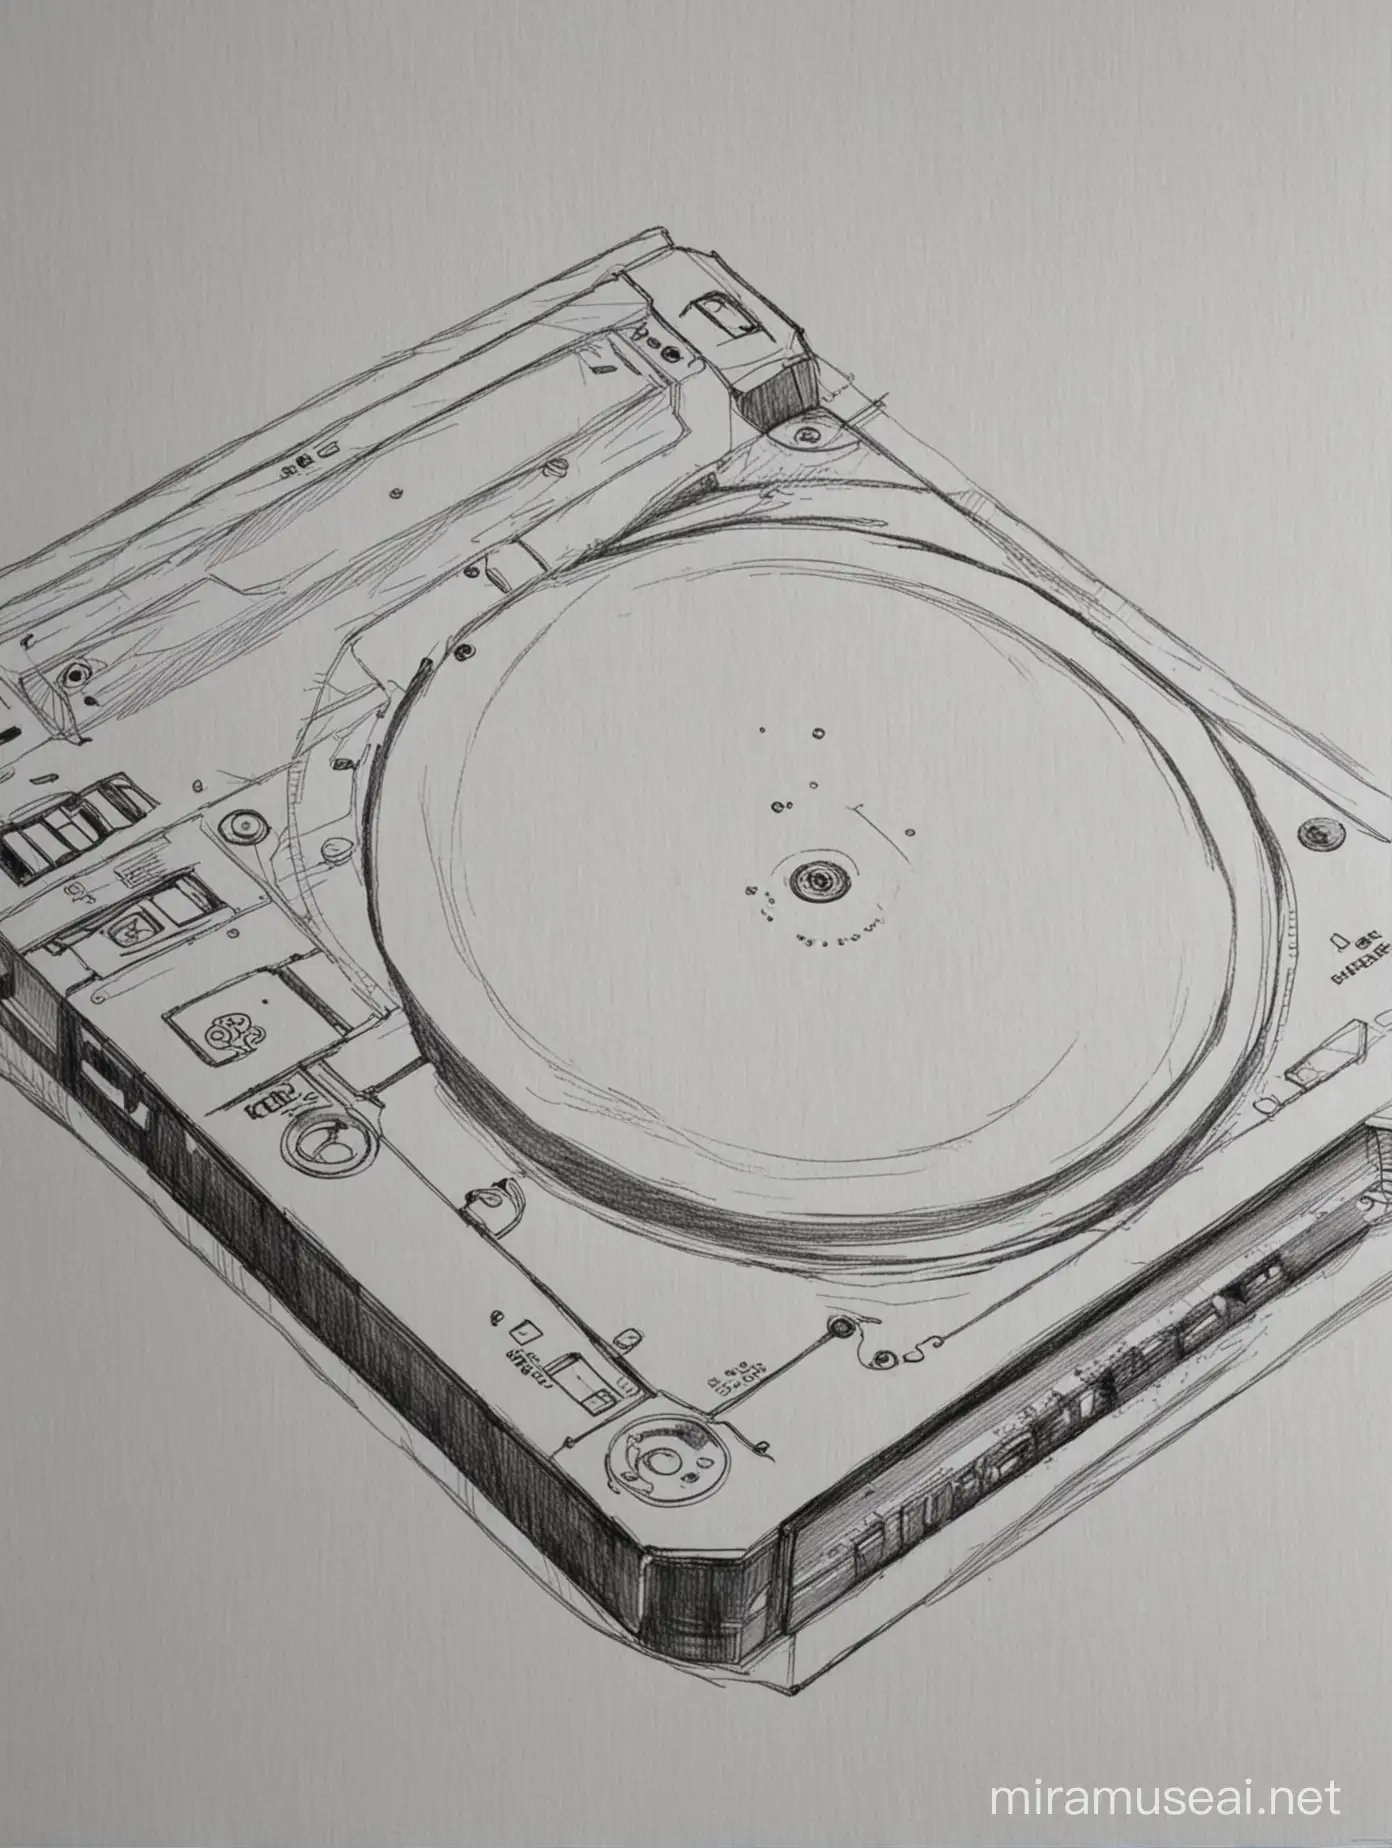 Draw a technological CD player